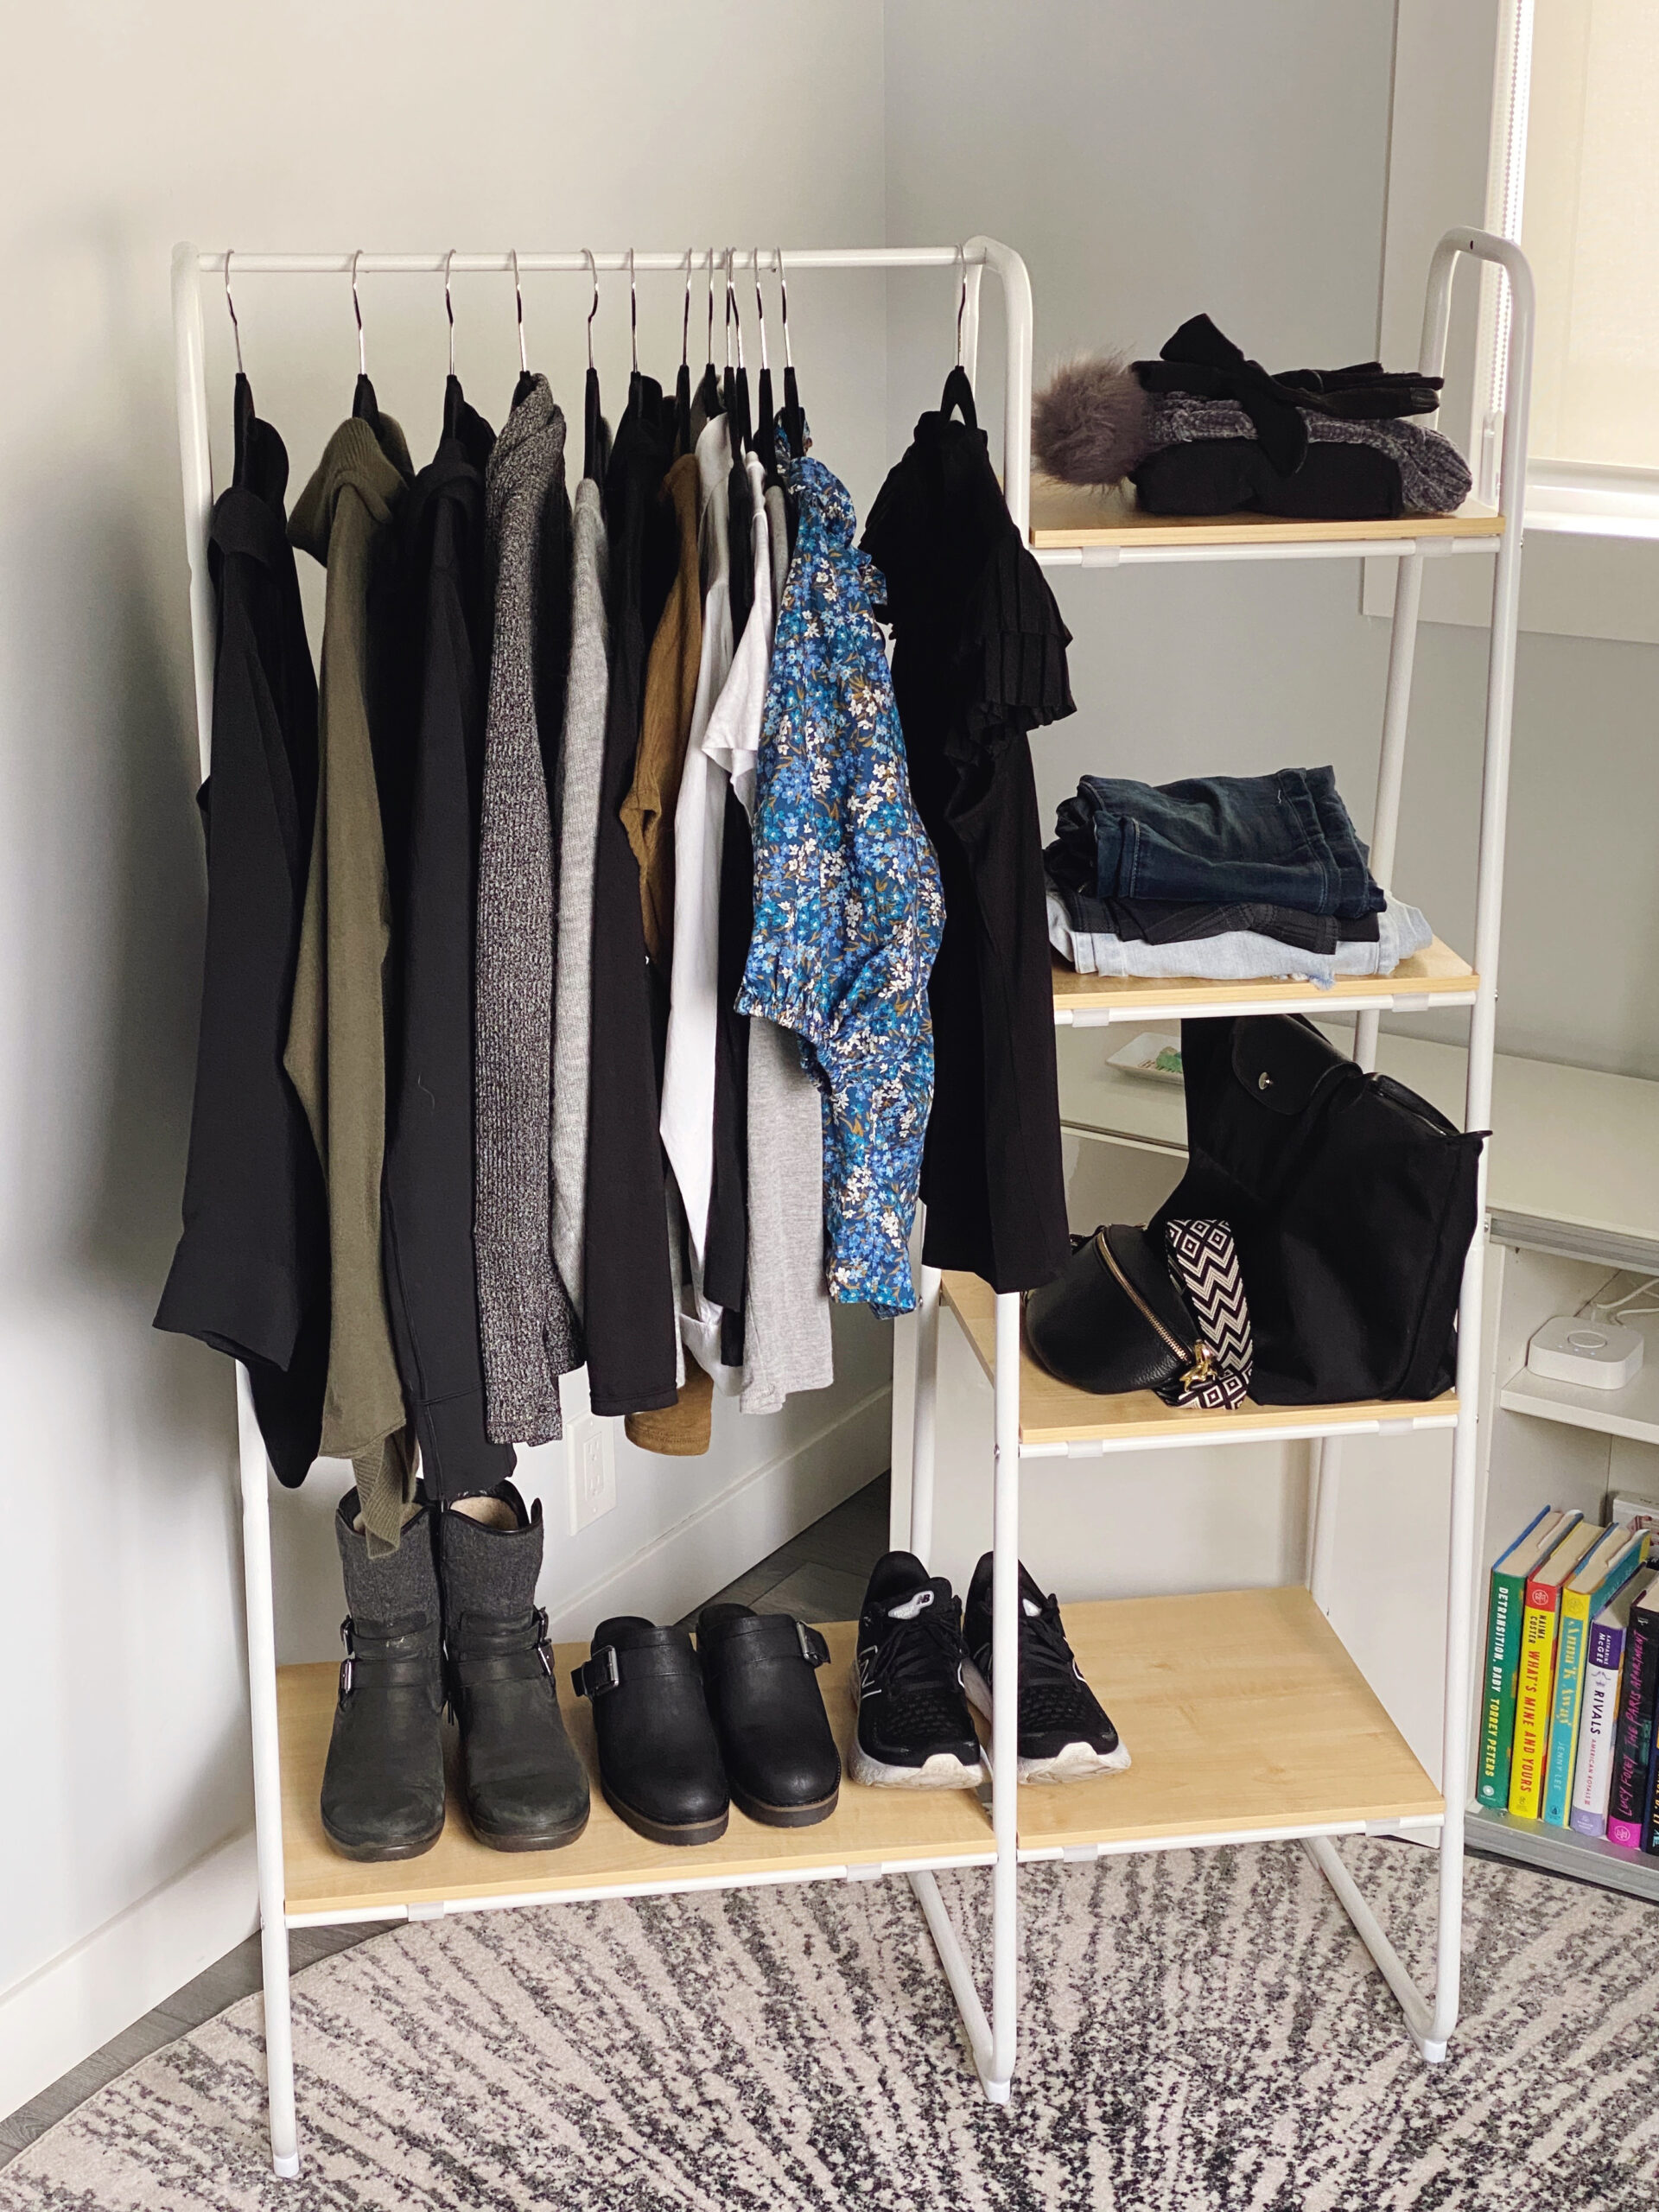 My current capsule wardrobe including clothes, shoes and accessories.